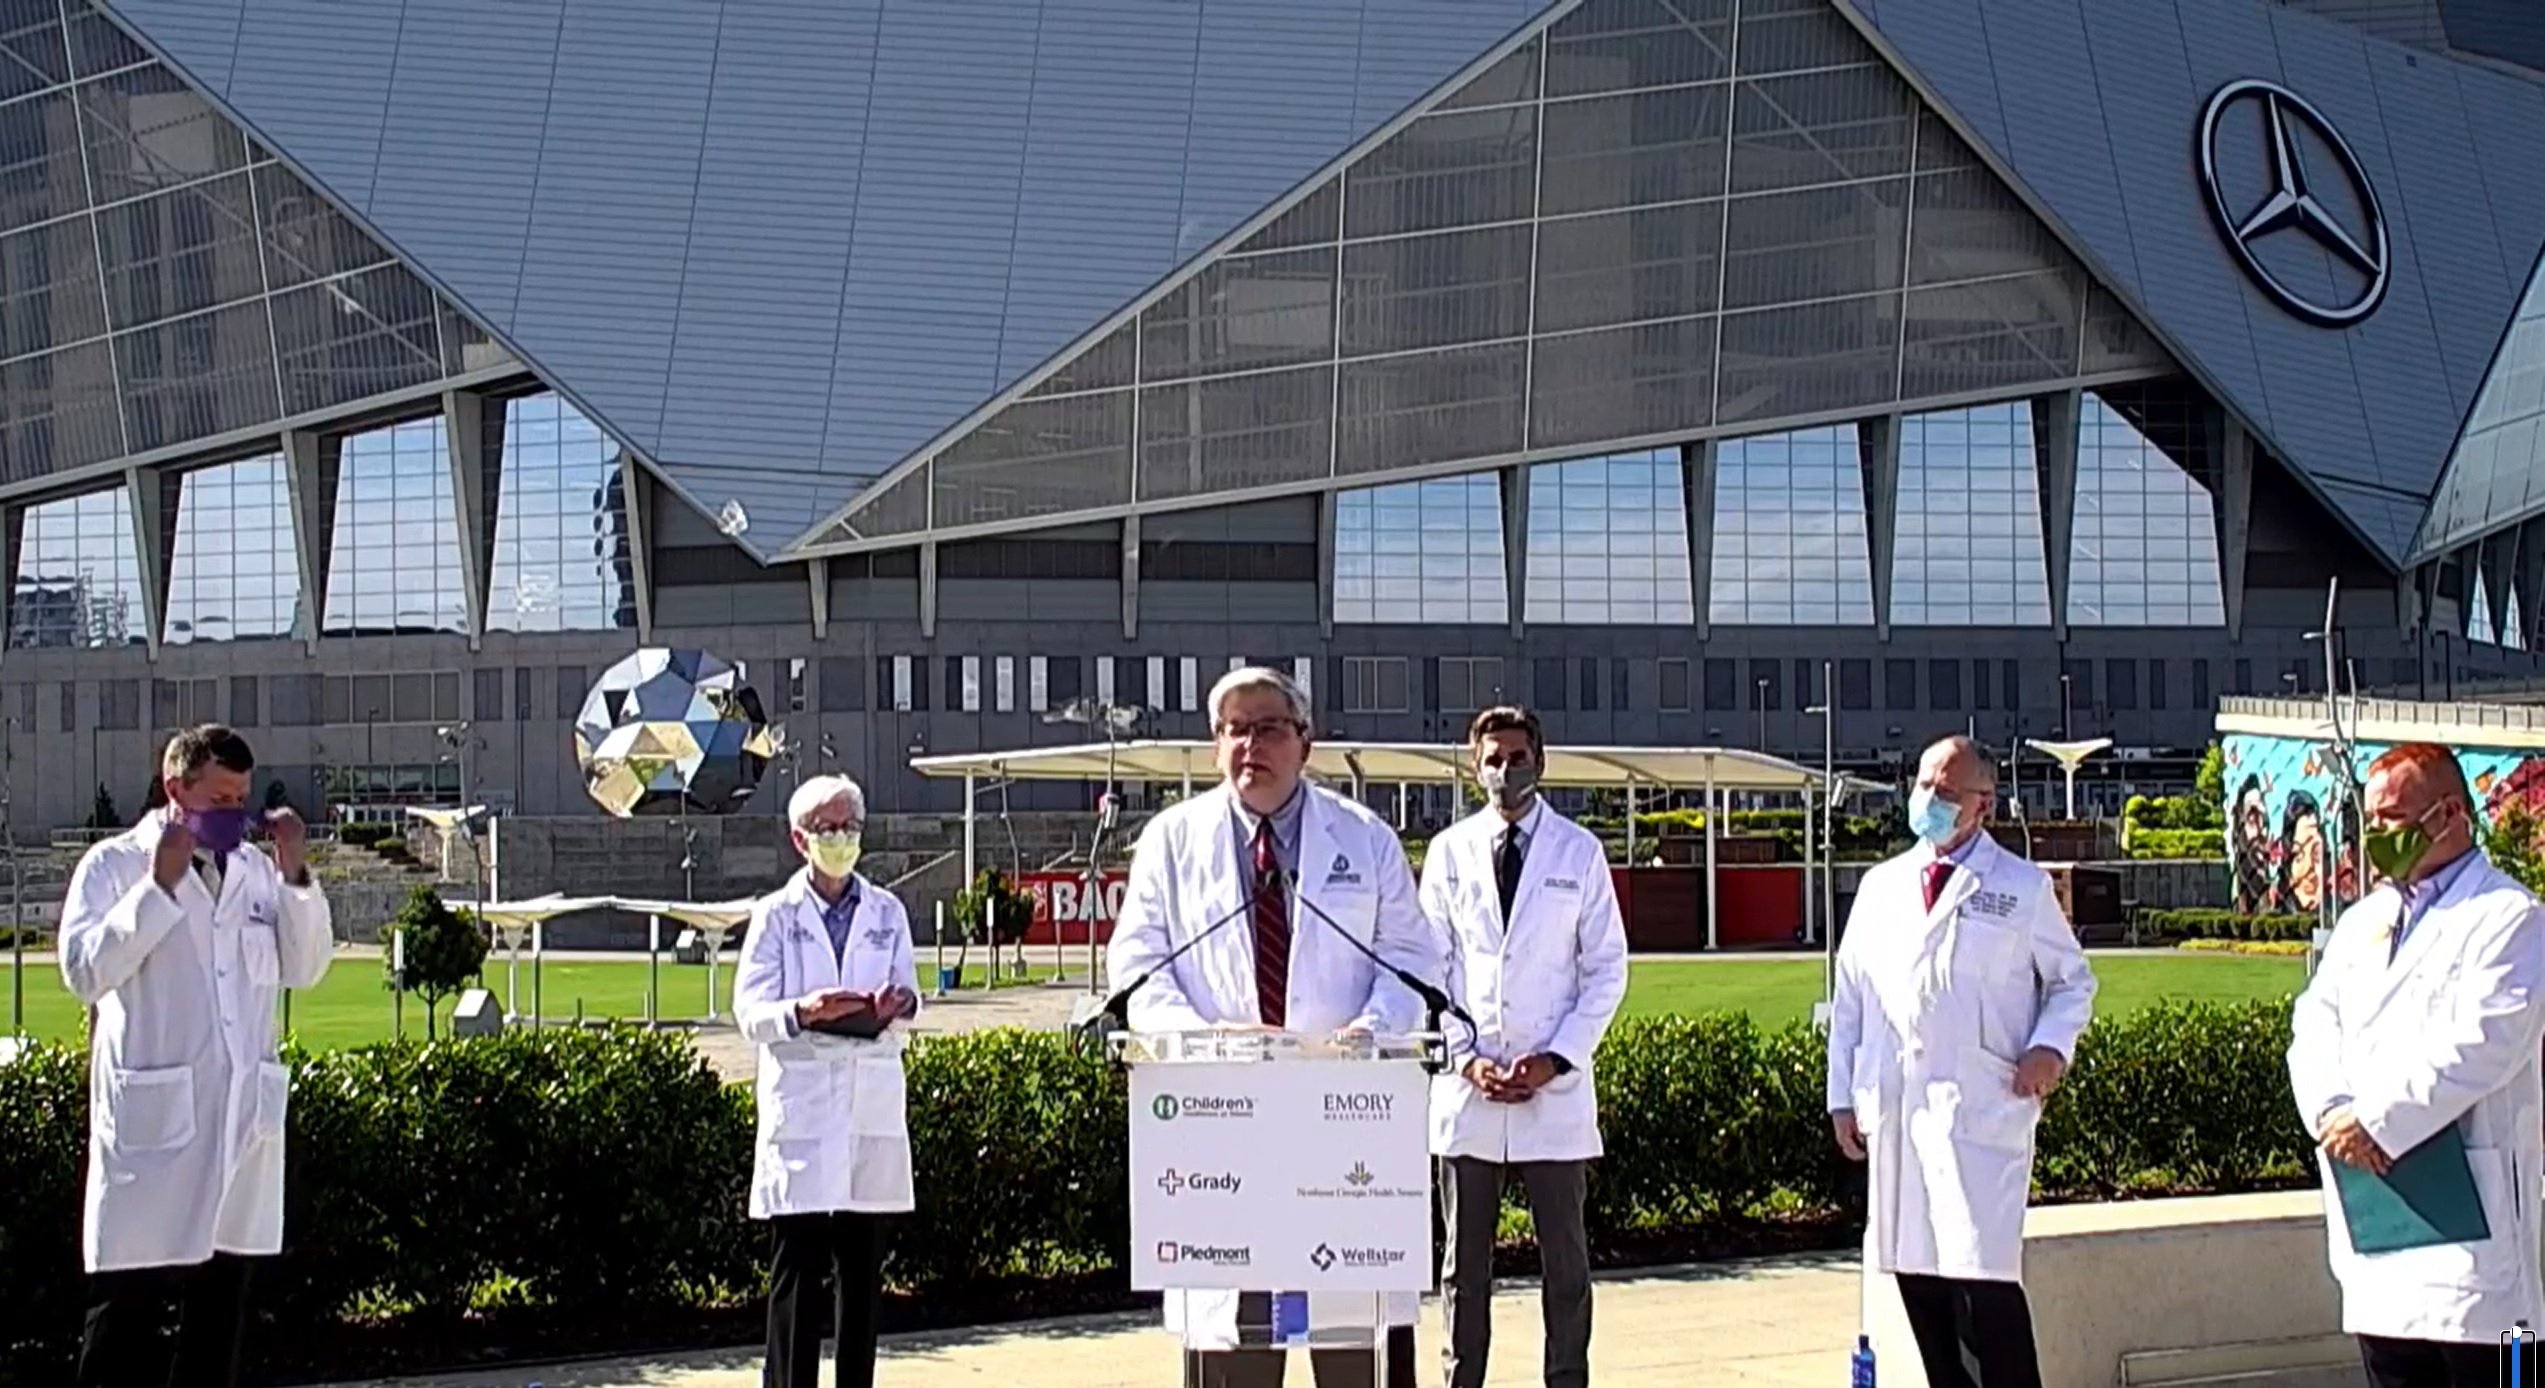 Atlanta clinical leaders address the press in front of Mercedes-Benz Arena in August 2021